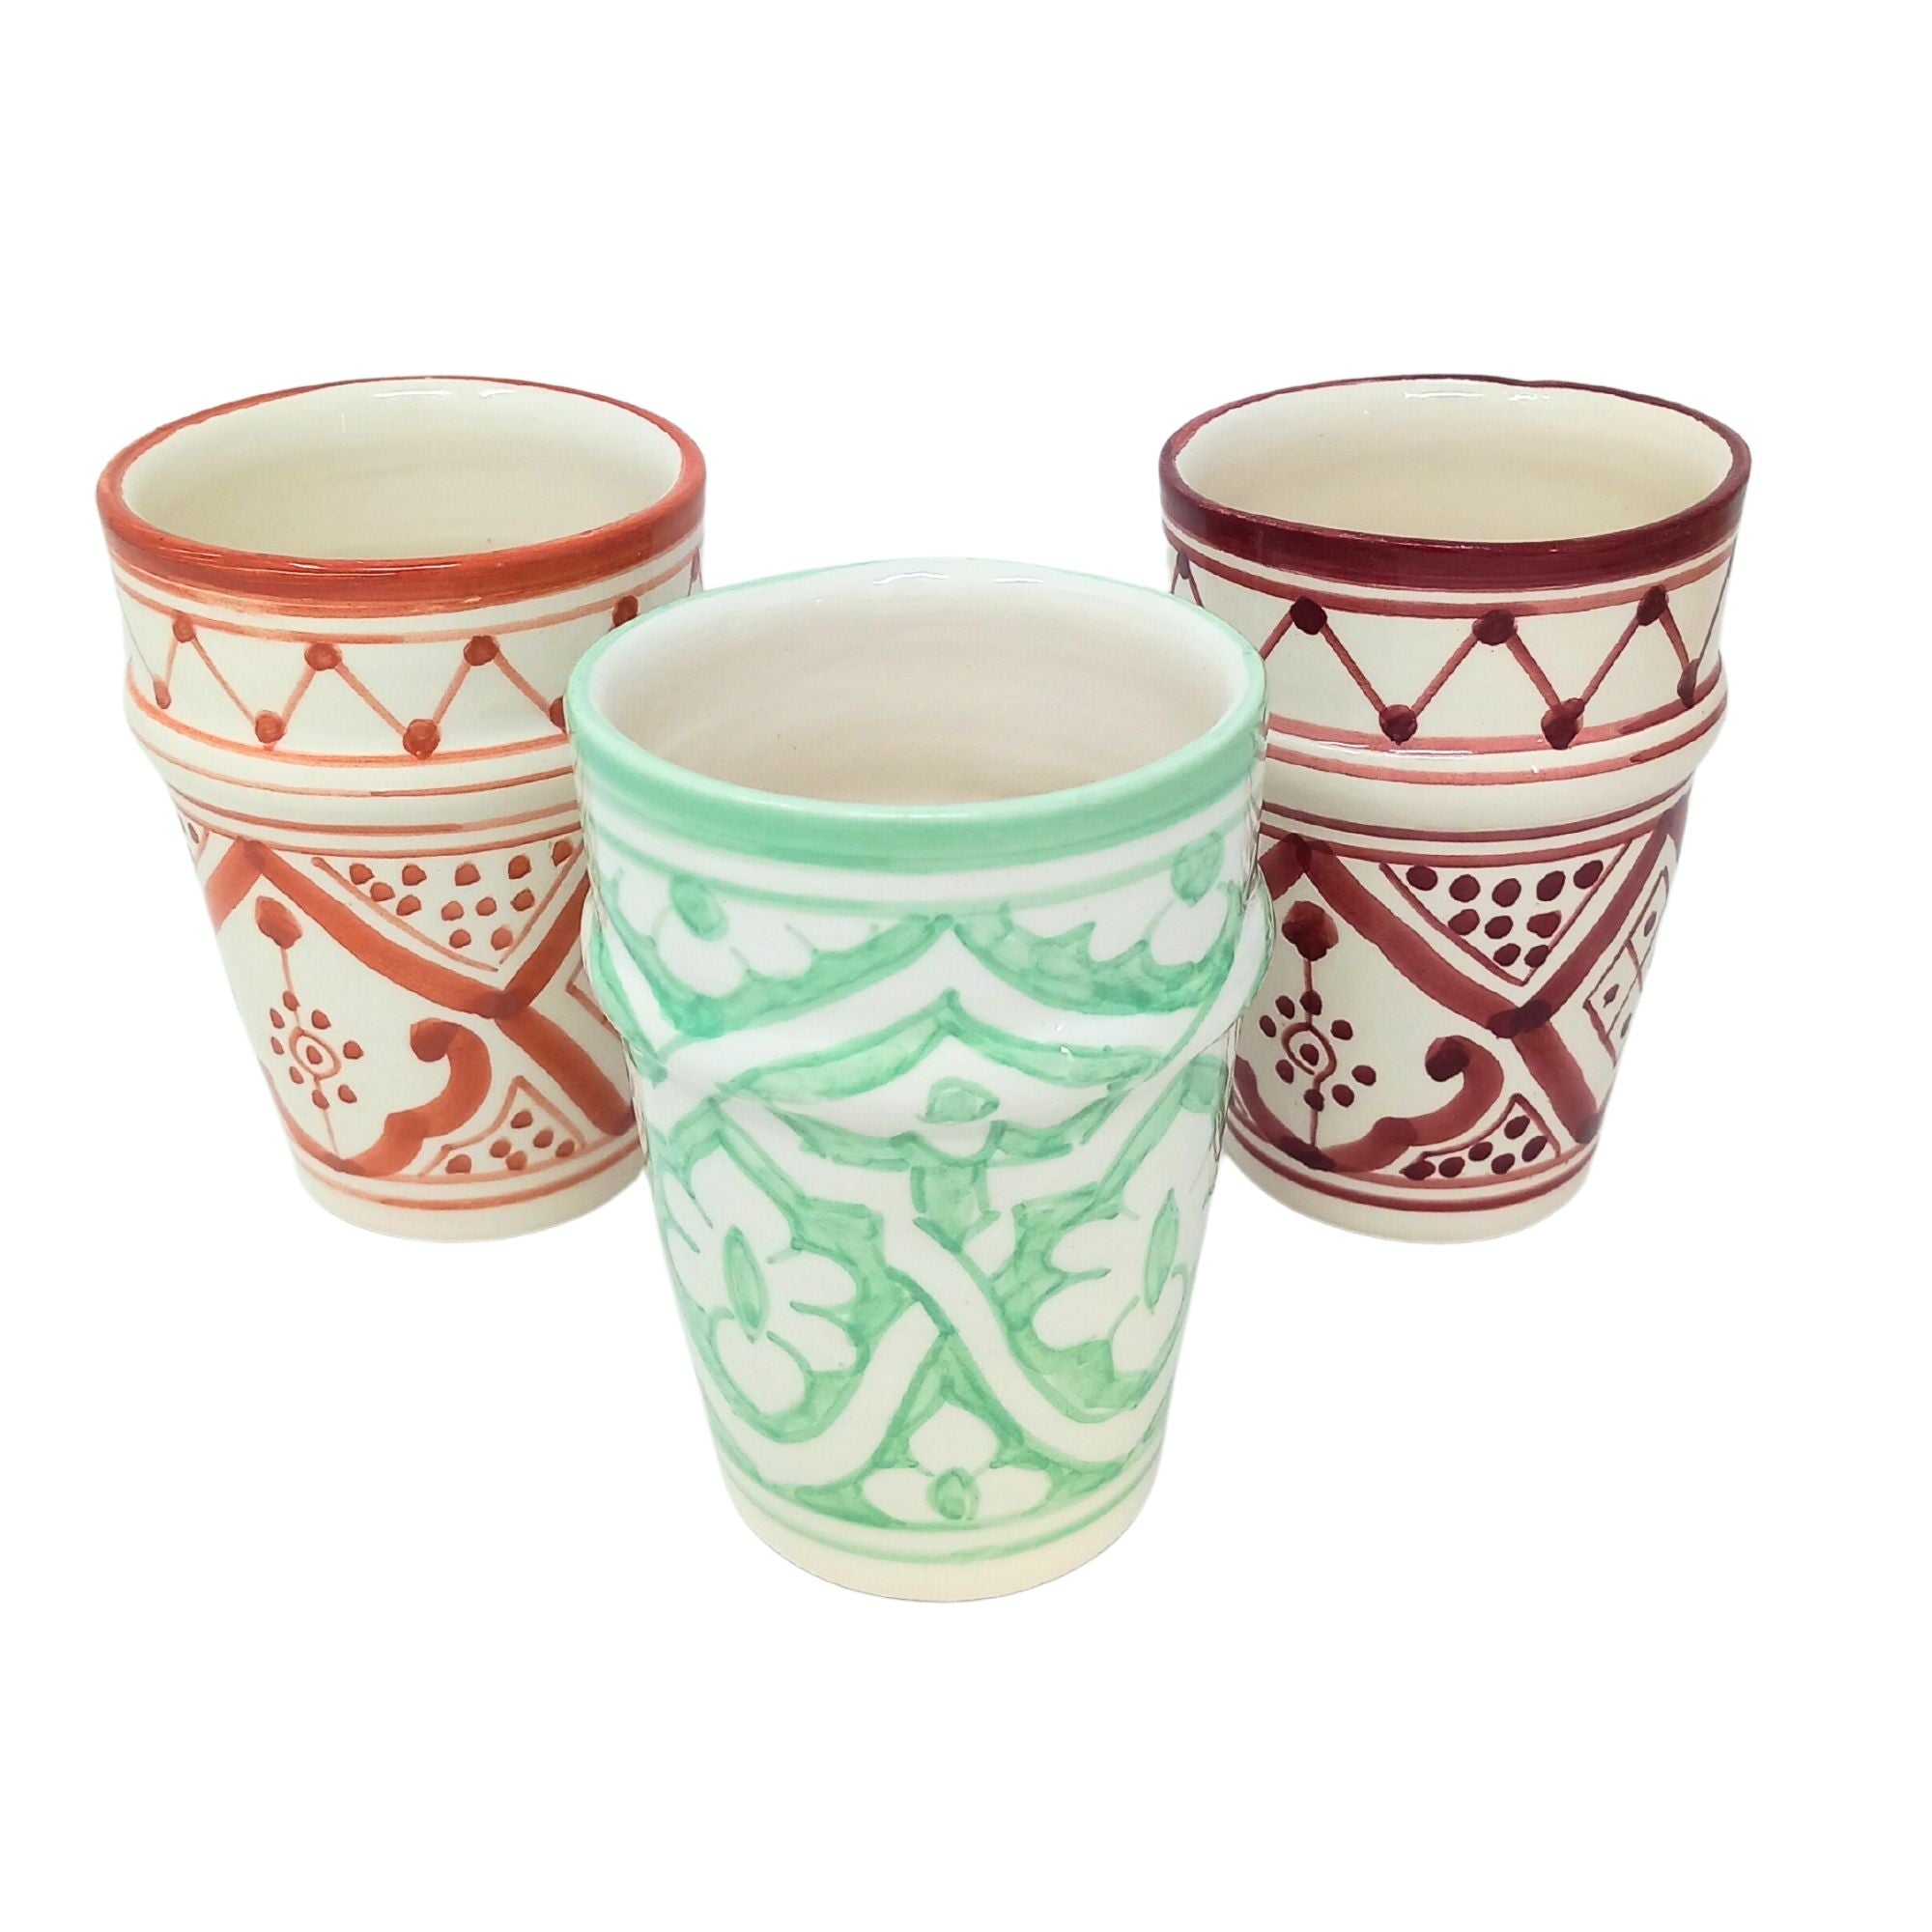 picture of handcrafted ceramic mugs in three colours: orange, mint green and burgundy red